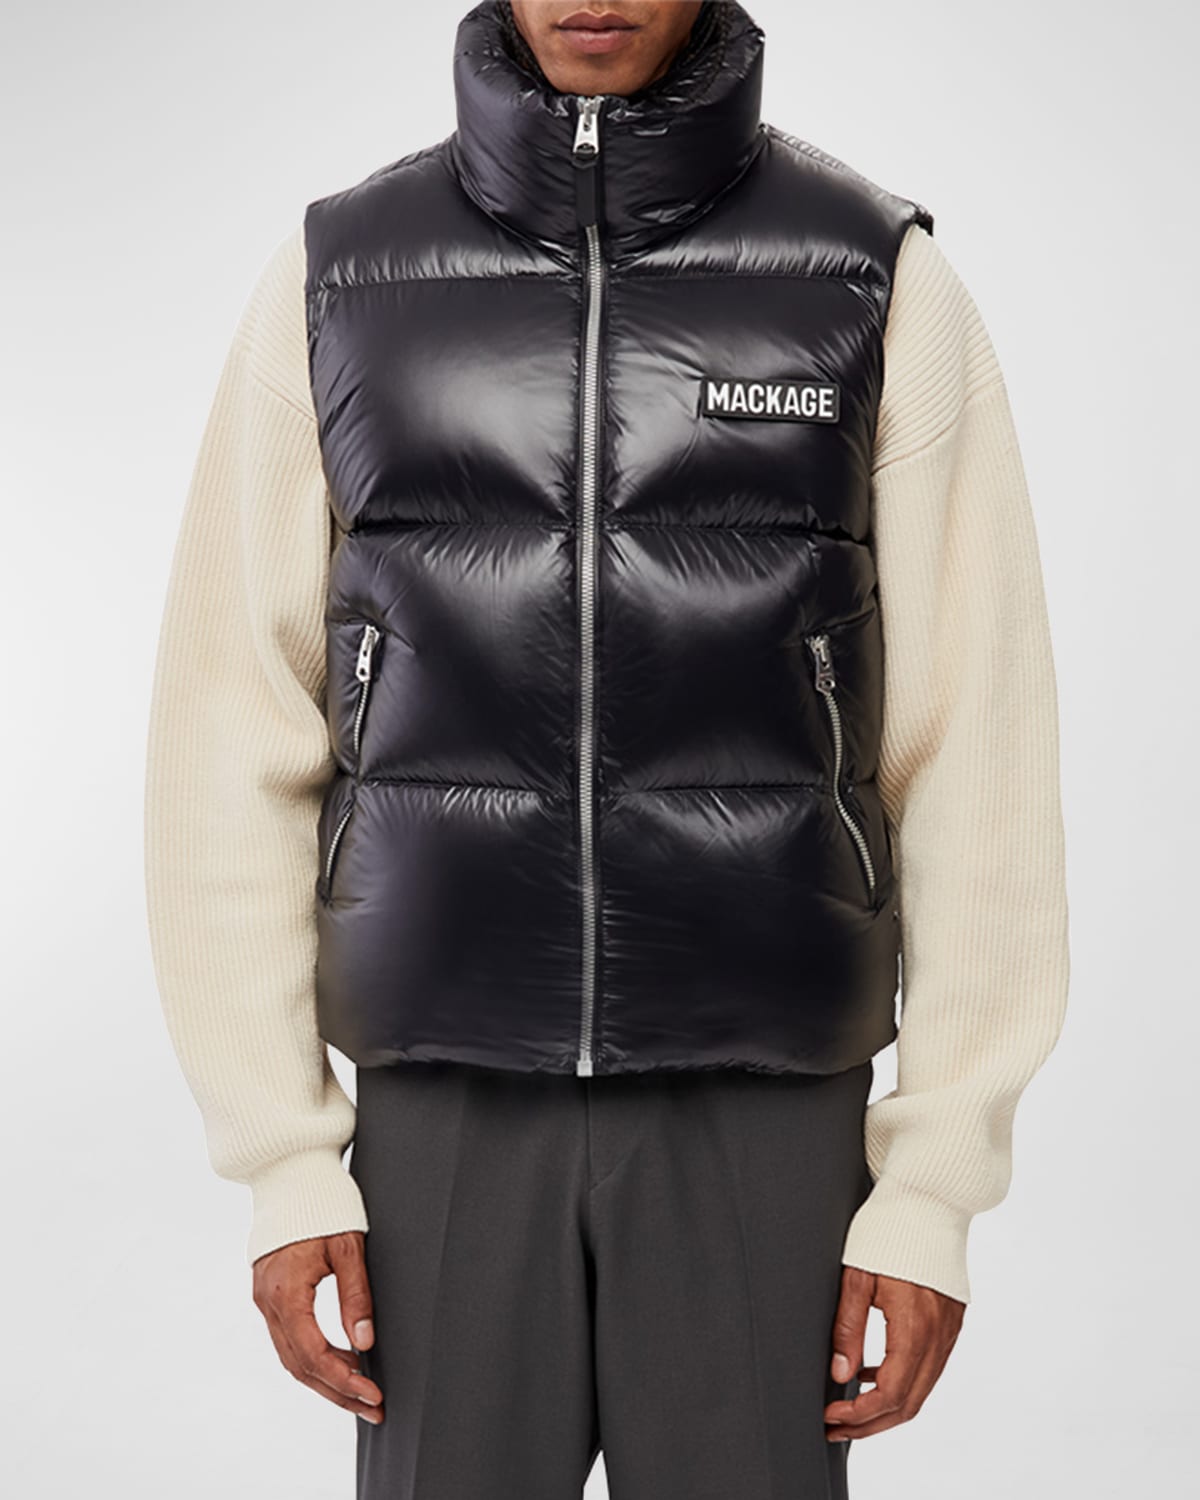 Mackage Men S Hardy Quilted Down Puffer Vest Neiman Marcus